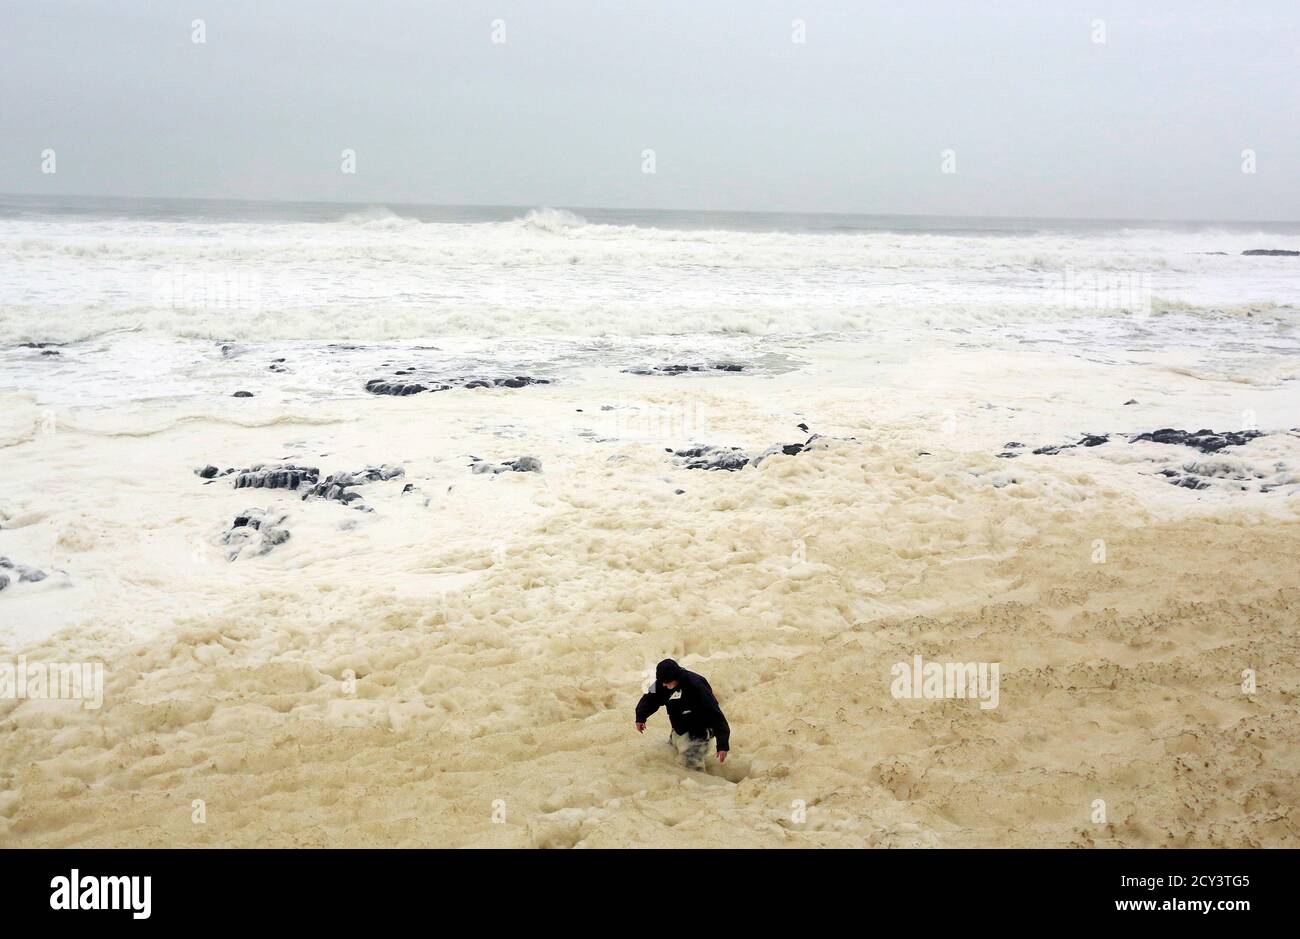 A man walks through sea foam created by storms, in the town of Portstewart on the Irish Coast January 9, 2015. The foam, known as spume, is caused by dissolved organic matter being agitated by breaking waves next to the shore.  REUTERS/Cathal McNaughton (NORTHERN IRELAND - Tags: ENVIRONMENT SOCIETY) Stock Photo